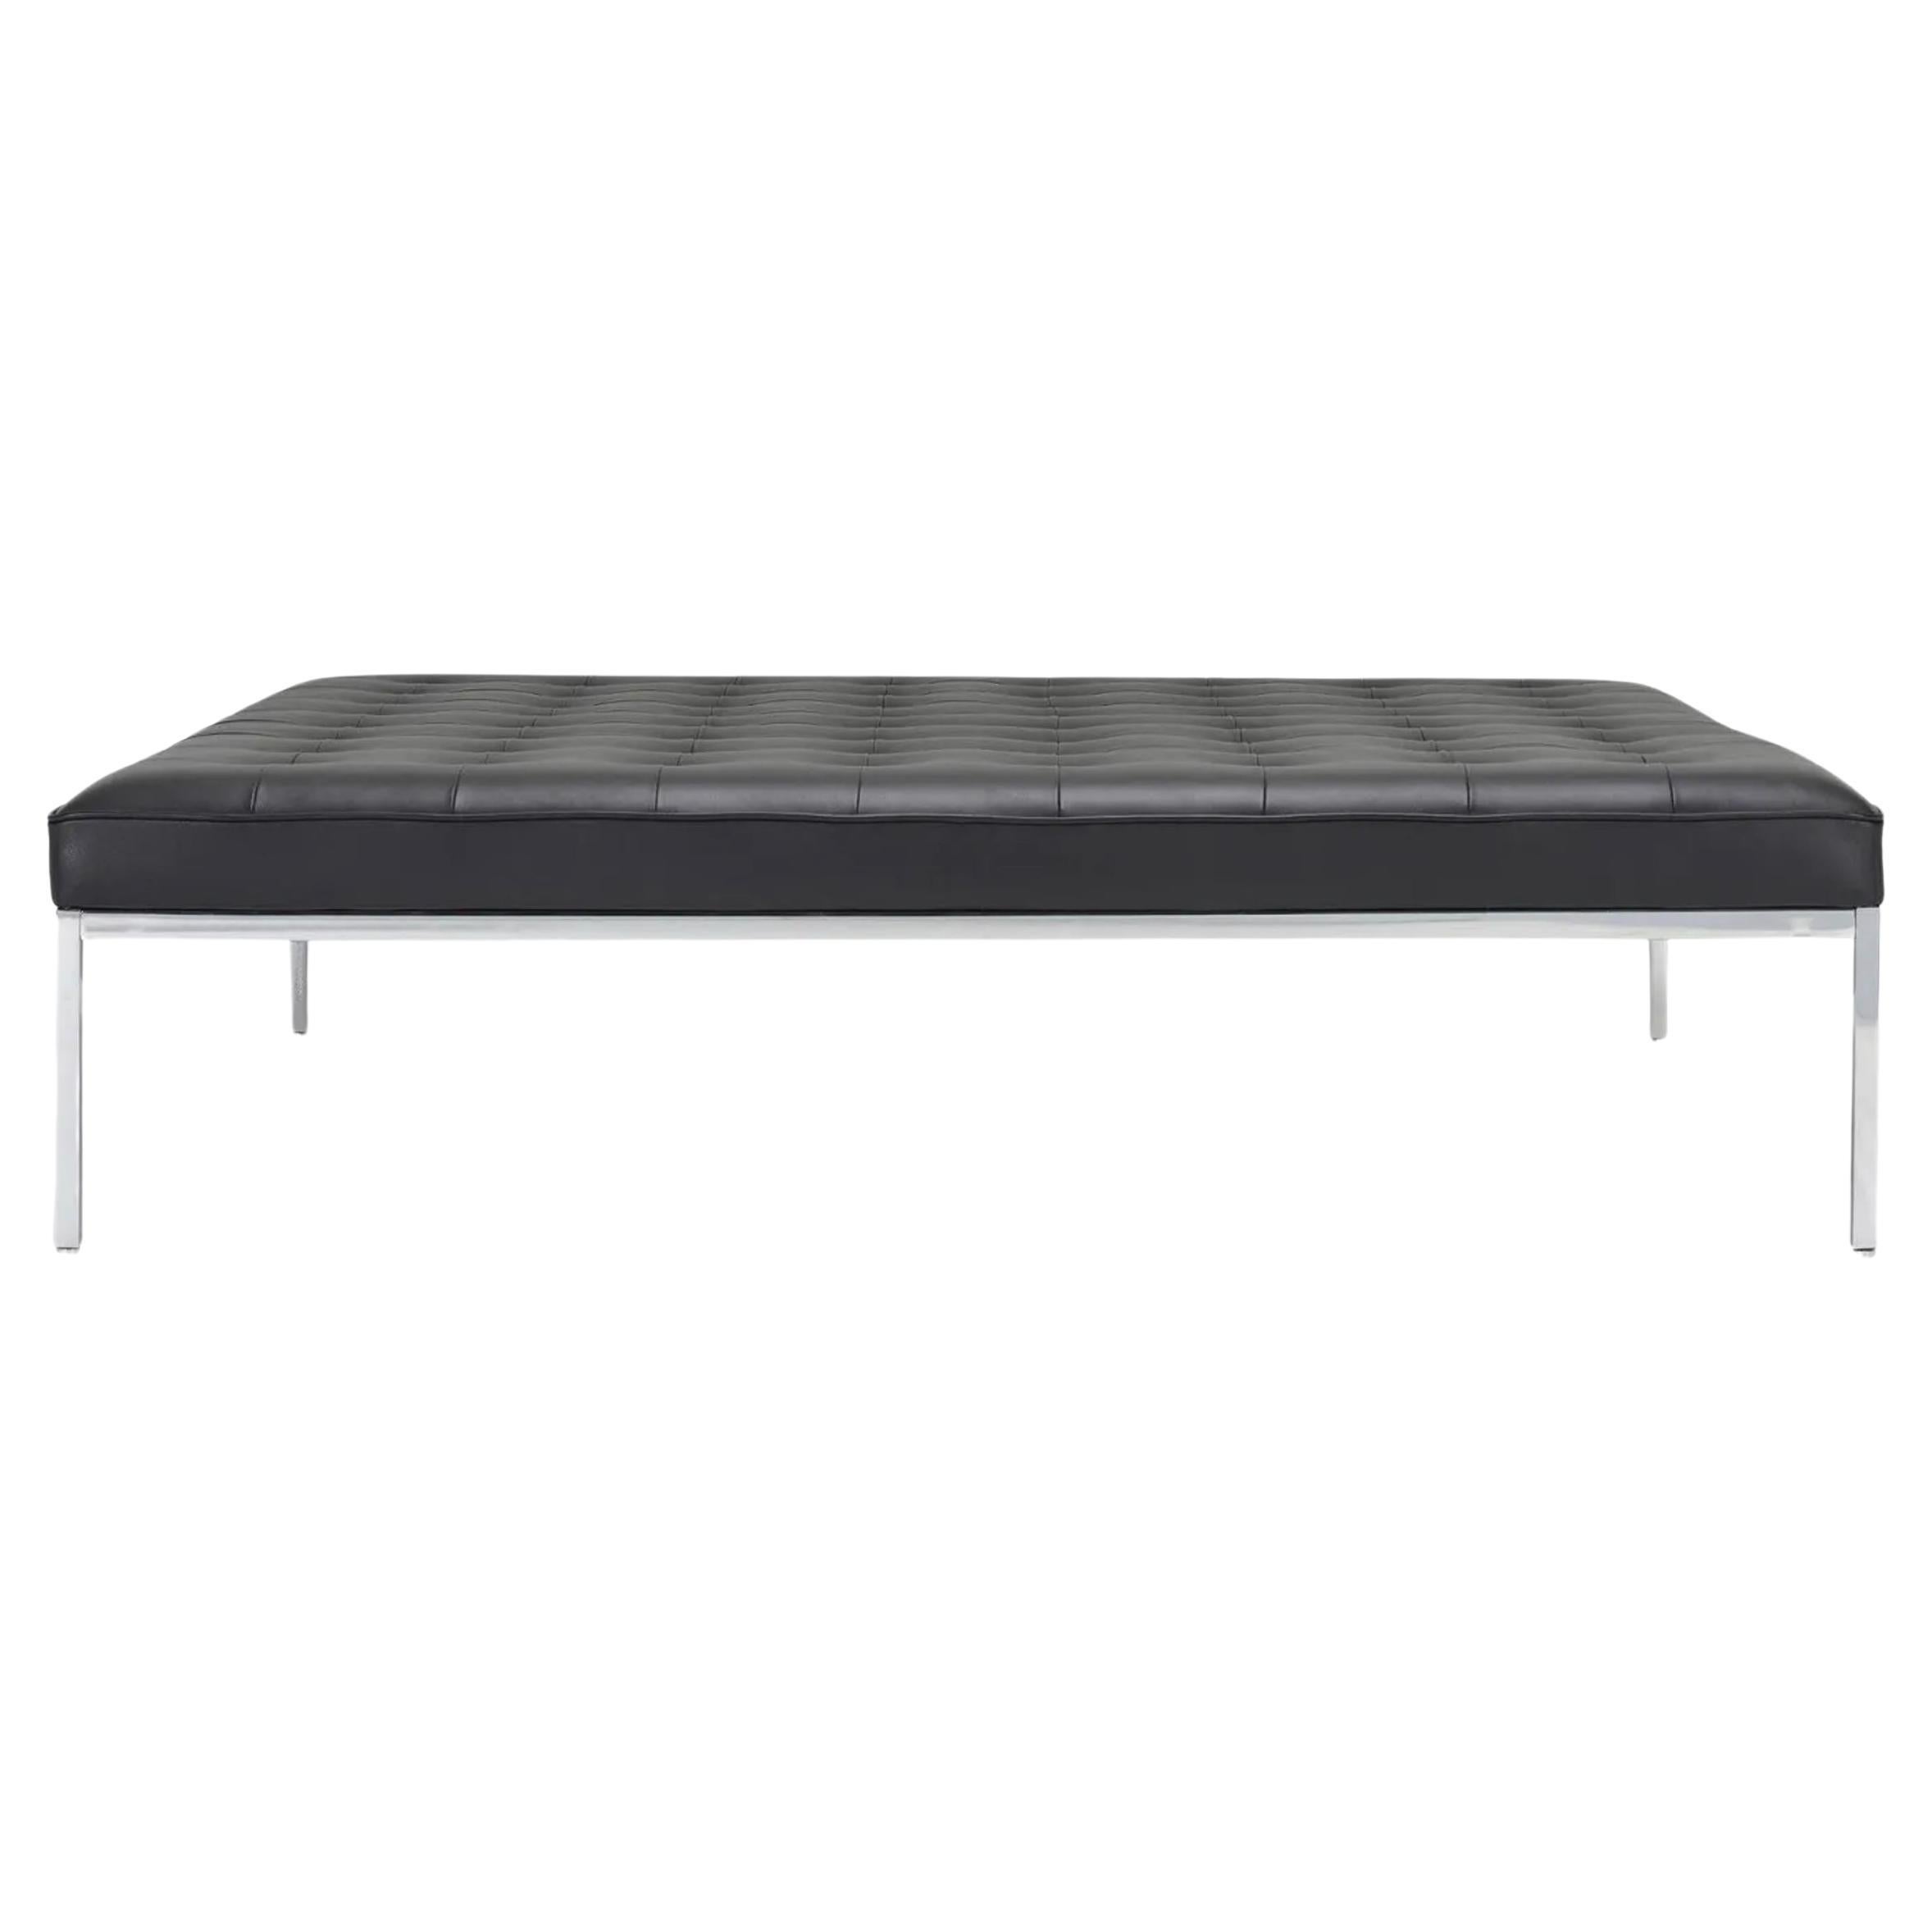 Custom unique Florence Knoll bench for Knoll is black leather and chrome frame. Amazing opportunity to own a one of a kind piece. This bench can also make a great soft ottoman. 